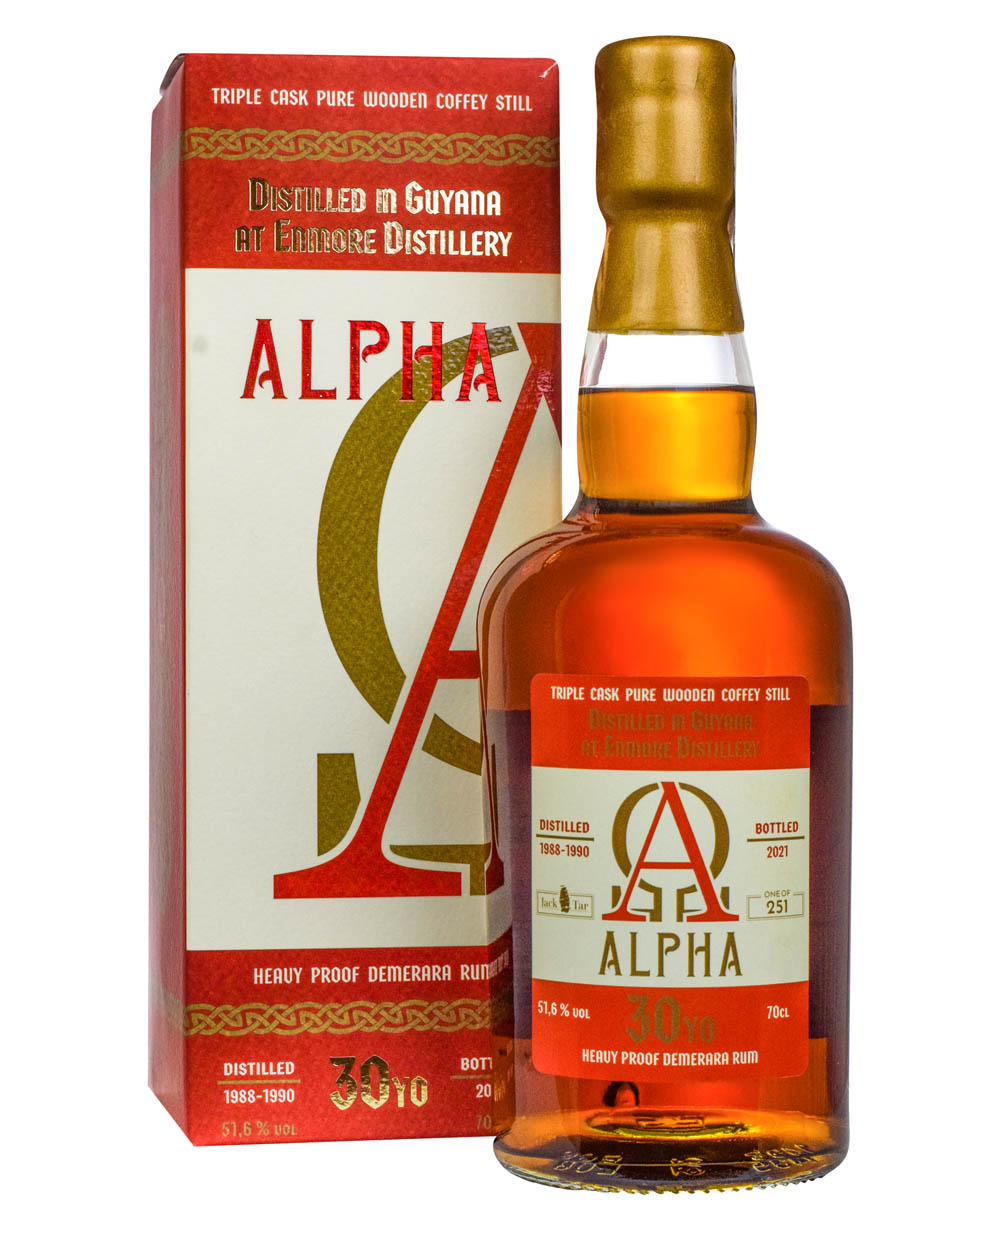 Enmore 30 Years Old Jack Tar Alpha Enmore 1988.1990-2021 Box Must Have Malts MHM